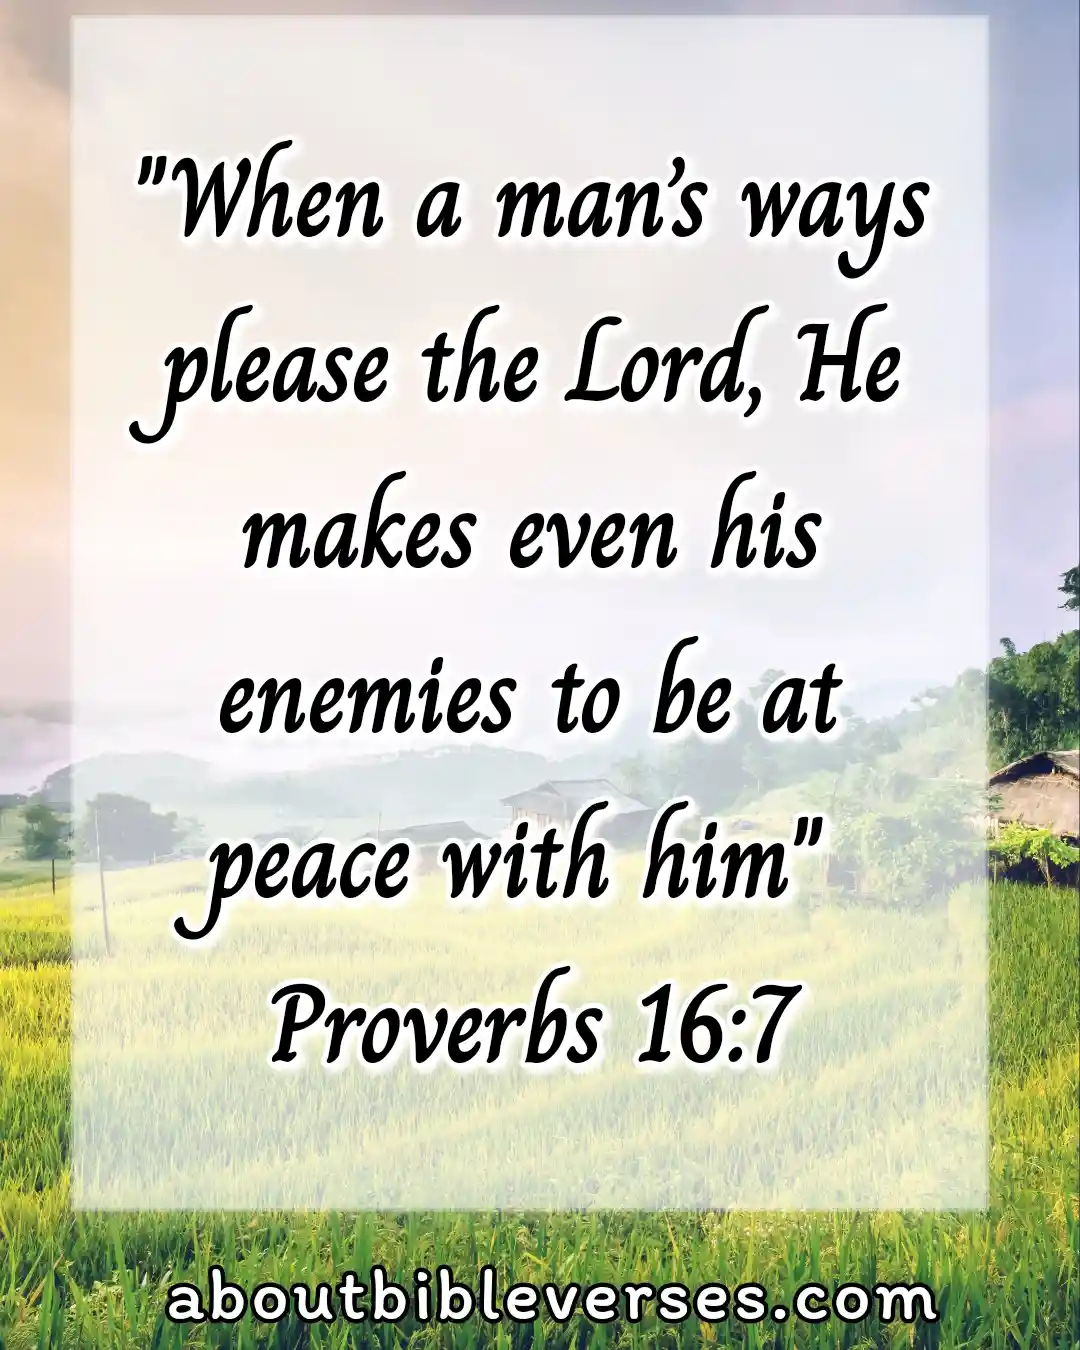 Monday Blessings Bible Verses (Proverbs 16:7)